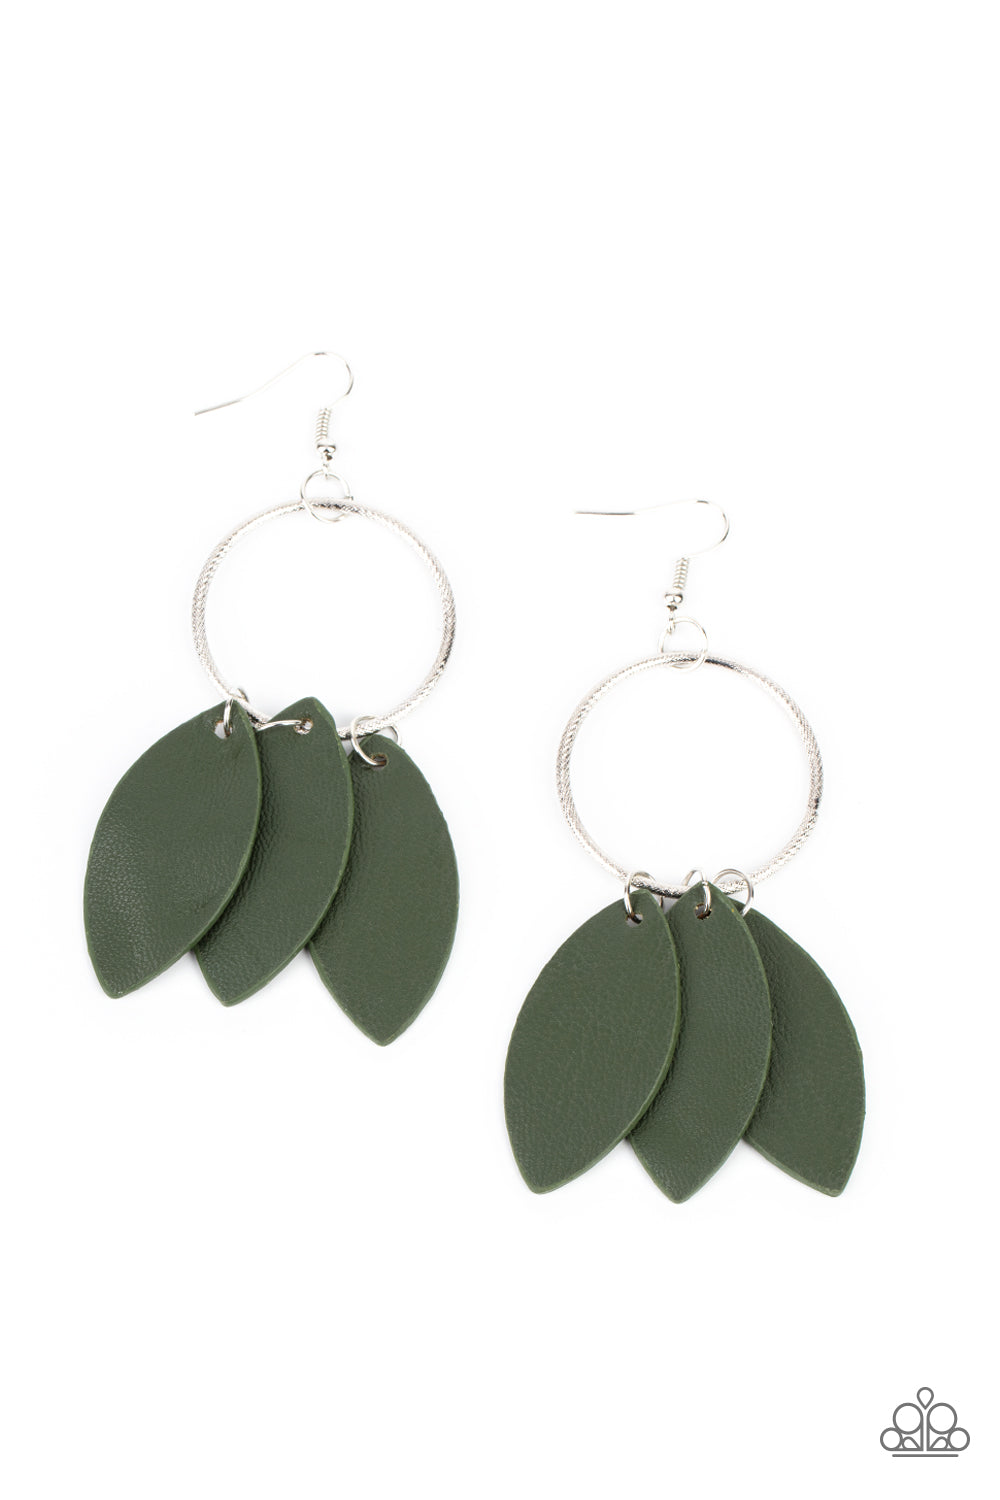 Leafy Laguna Green Earring - Paparazzi Accessories  Leafy green leather frames swing from the bottom of a textured silver hoop, creating an earthy fringe. Earring attaches to a standard fishhook fitting.  All Paparazzi Accessories are lead free and nickel free!  Sold as one pair of earrings.